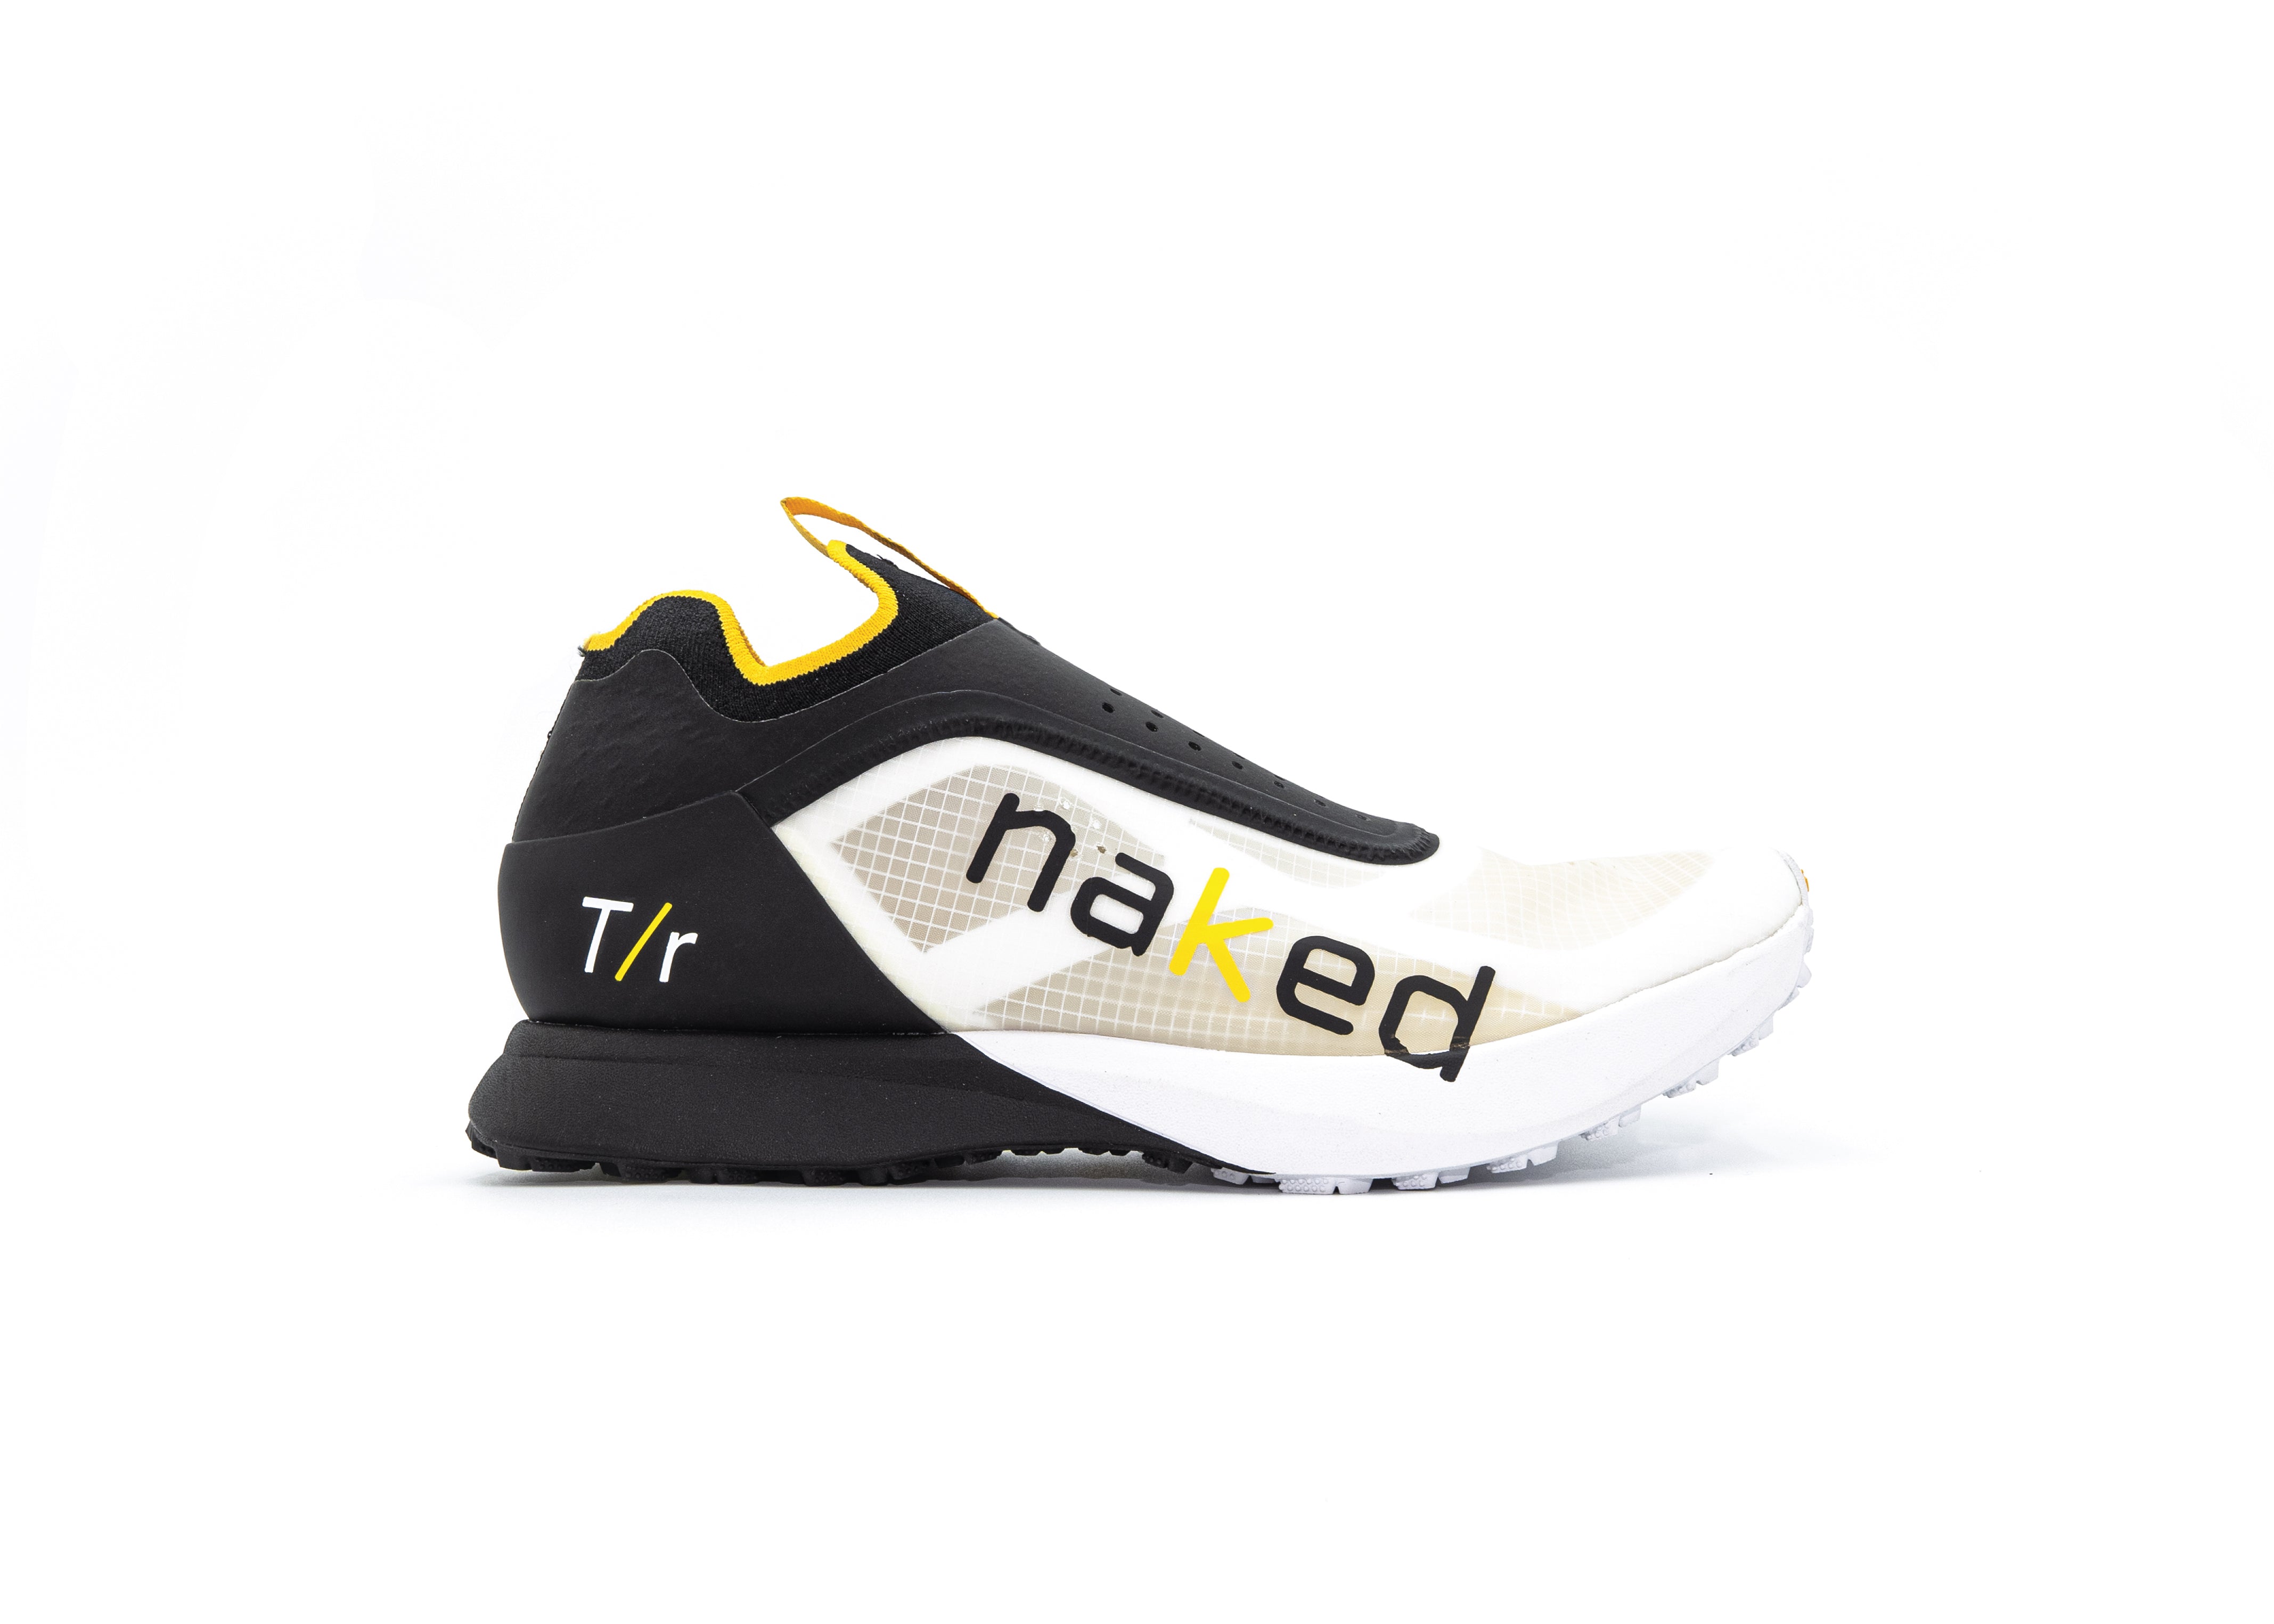 Naked® T/r Trail Racing Shoe Sports Innovations